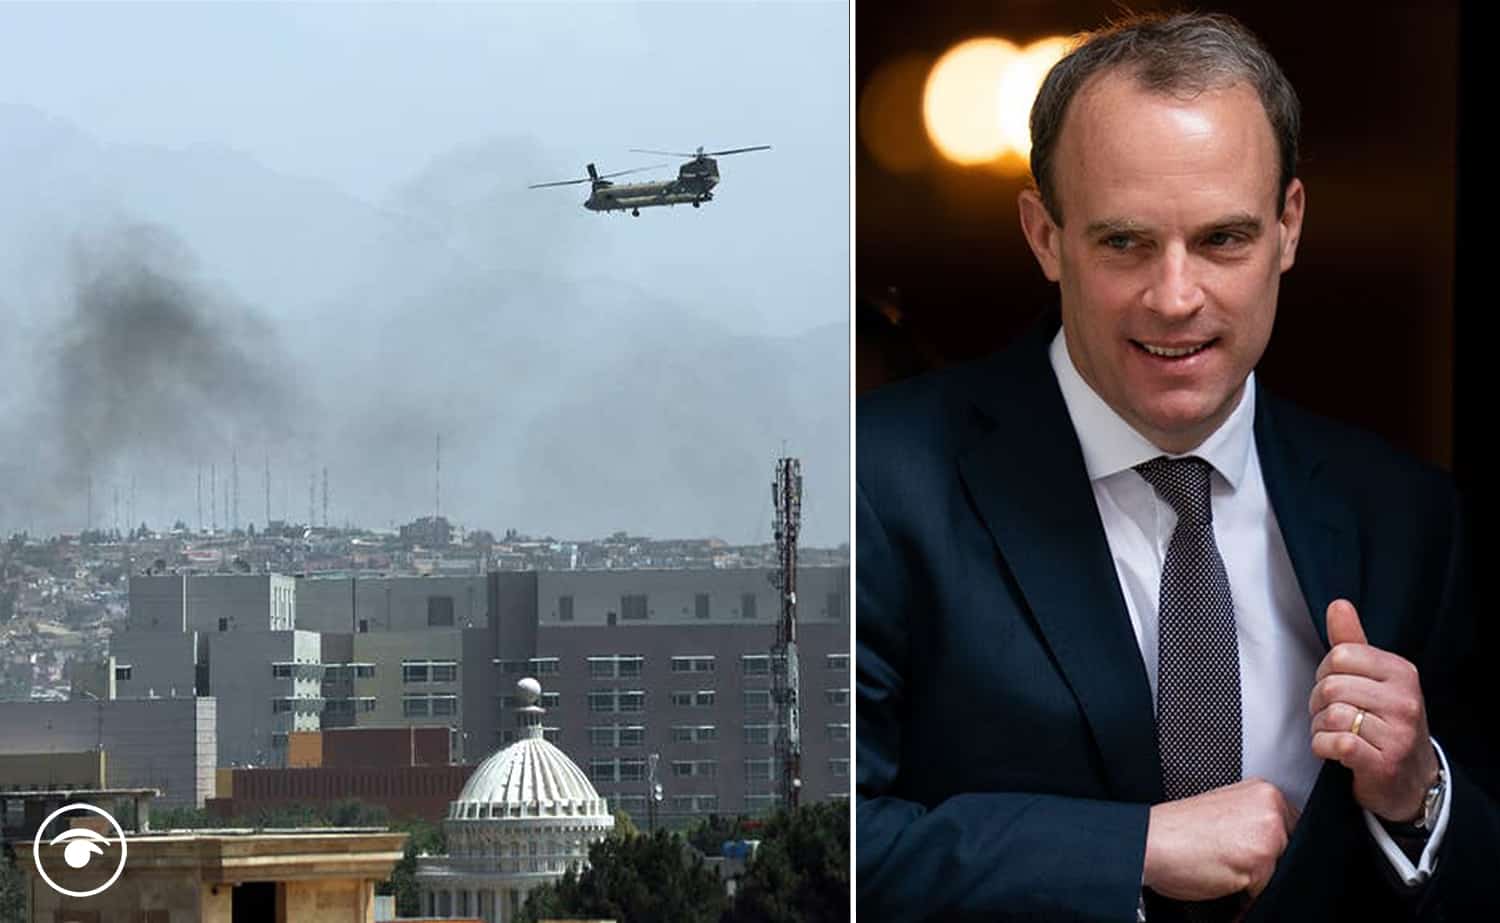 Dominic Raab went AWOL as Afghanistan situation escalated